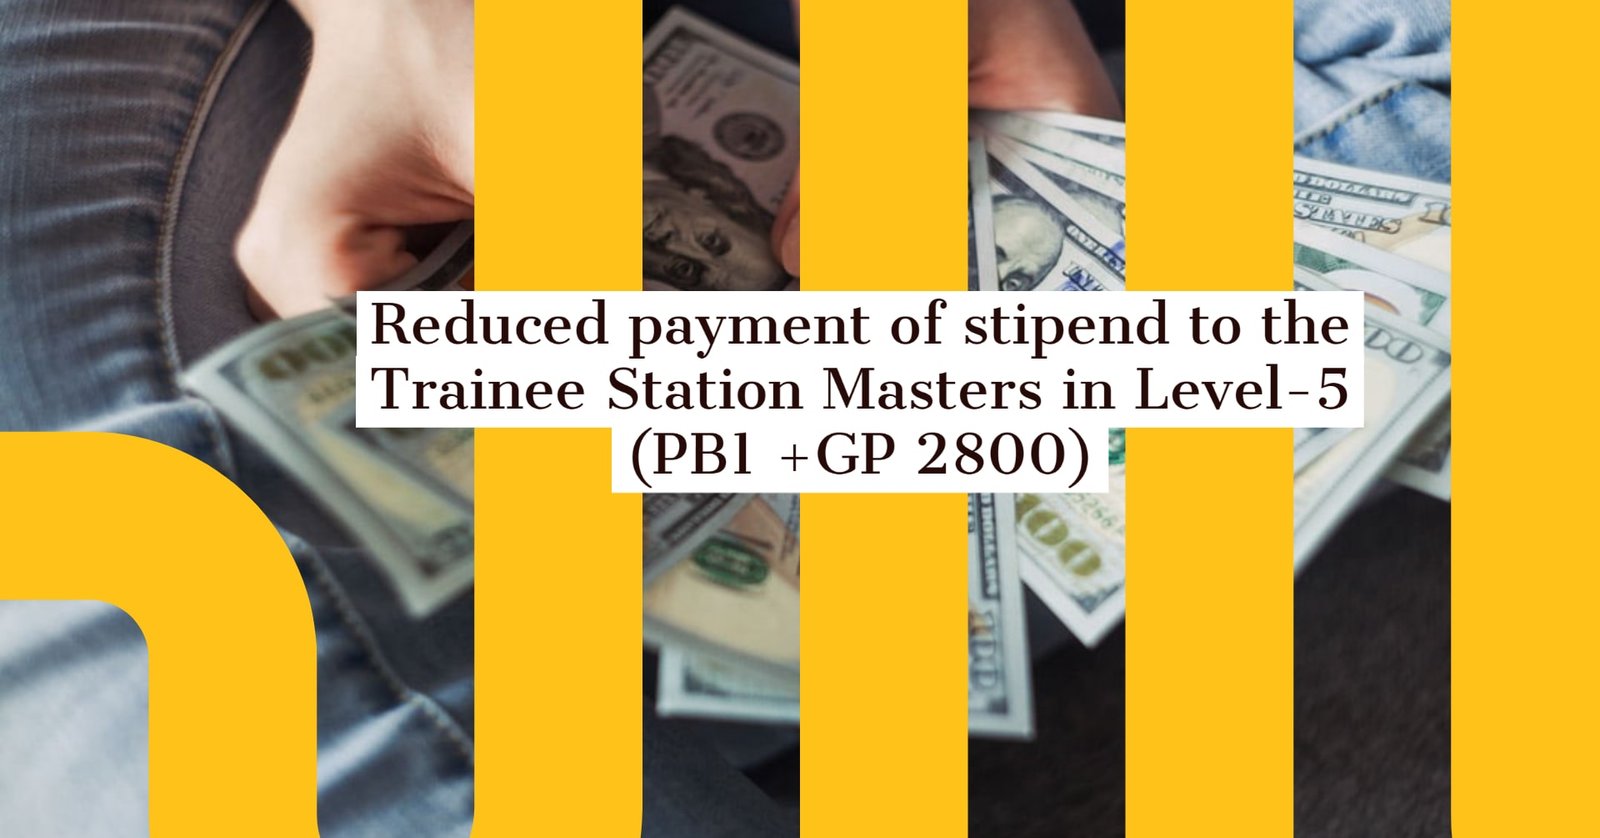 Reduced payment of stipend to the Trainee Station Masters in Level-5 (PB1 +GP 2800)